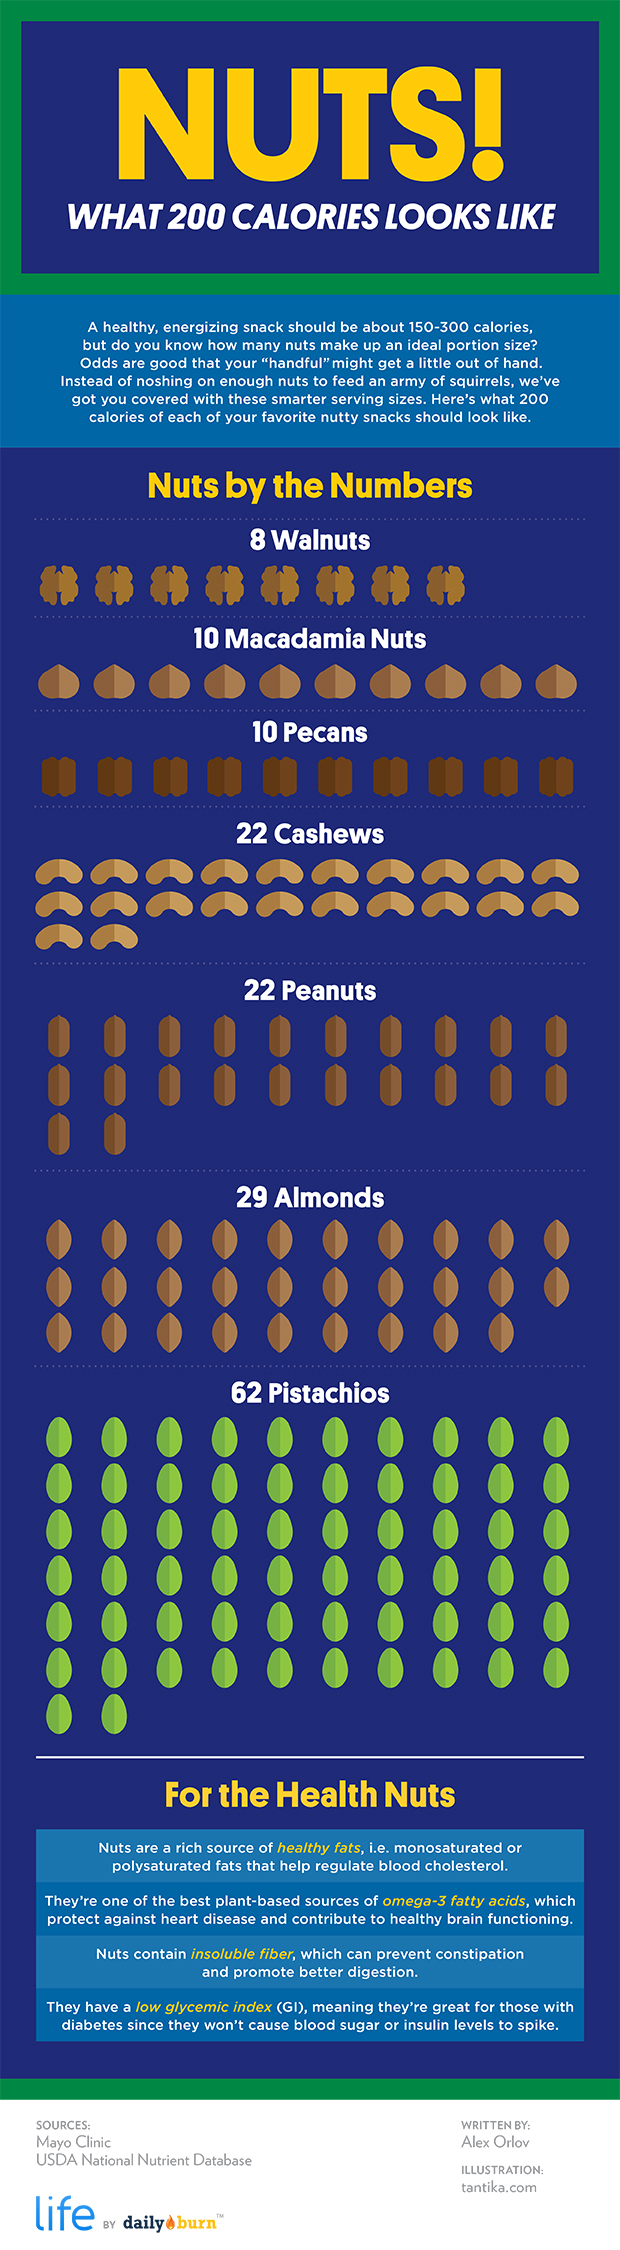 Nuts are healthy but dangerous to dieters who don’t know when to stop.  here’s serving sizes to help you – not go too nuts!